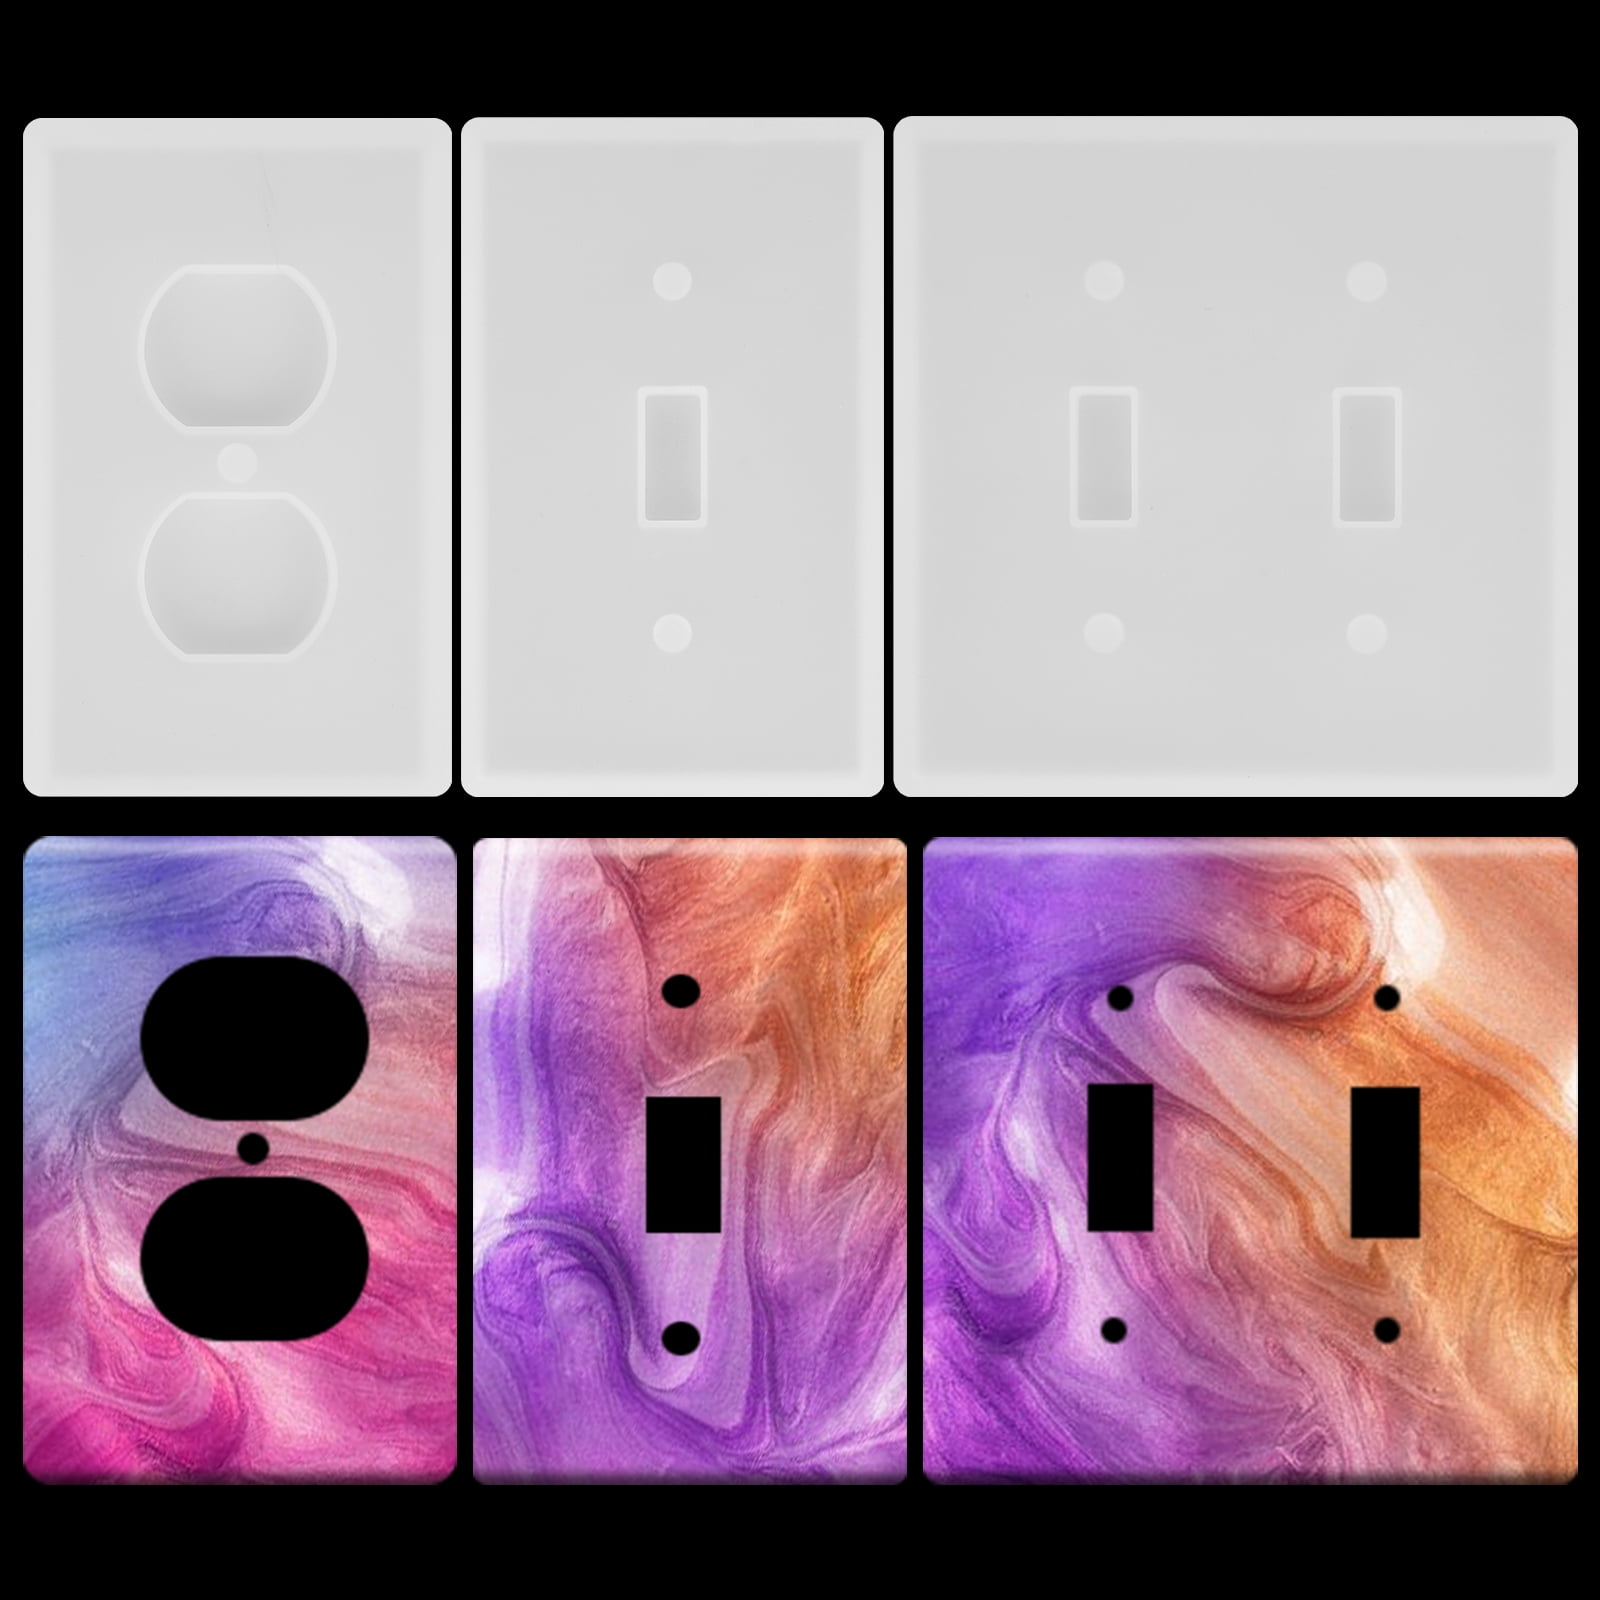 3 Pieces Switch Cover Resin Mold, TSV Light Switch Wall Plate